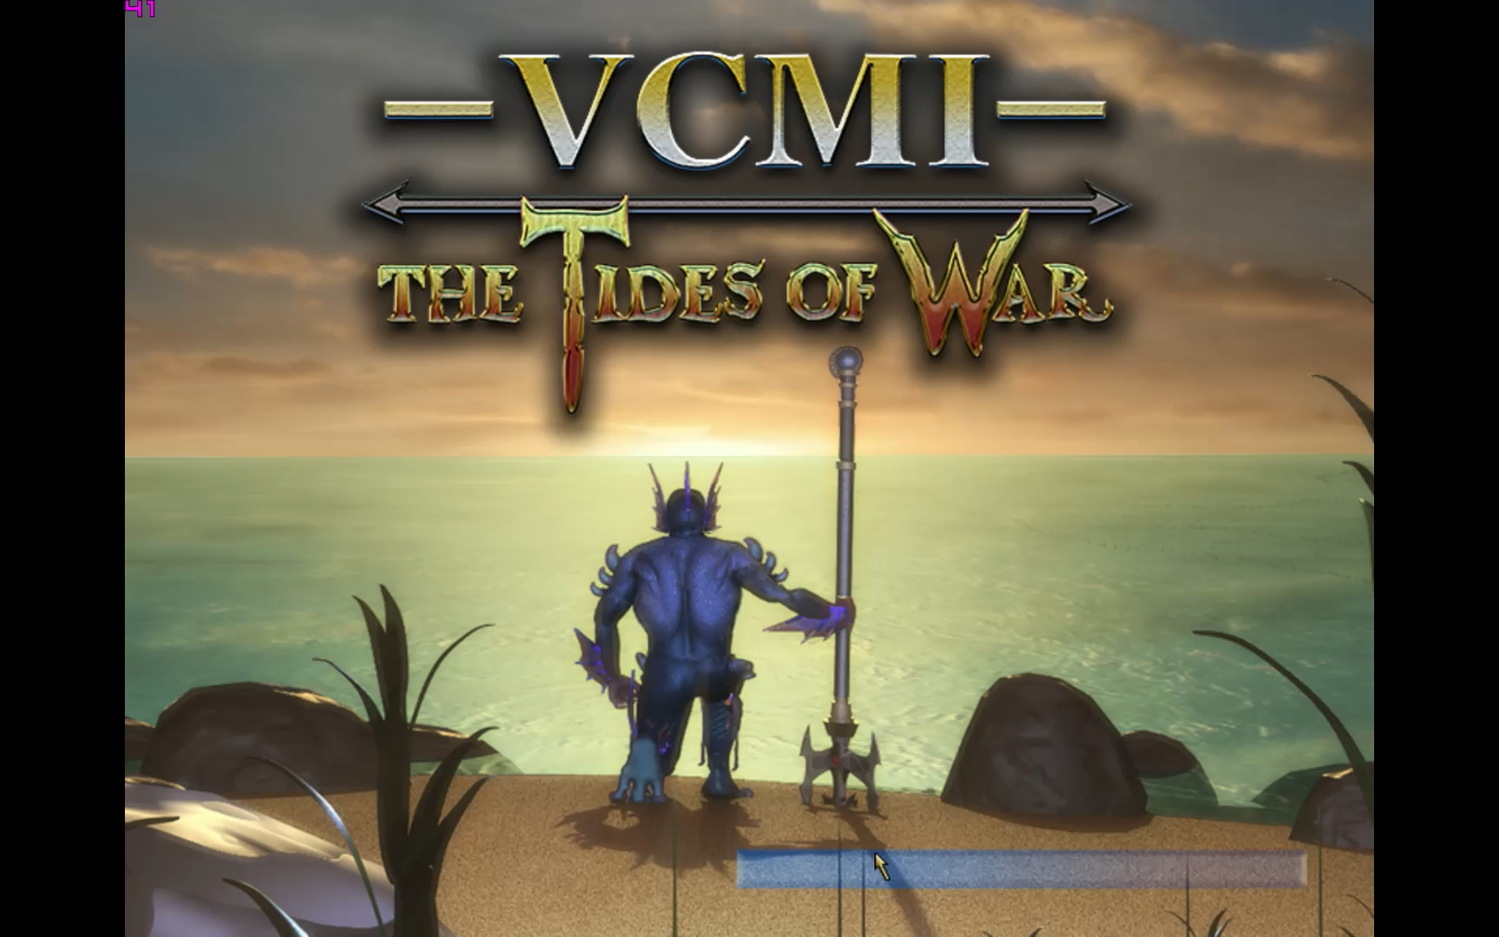 Heroes of Might and Magic III: VCMI